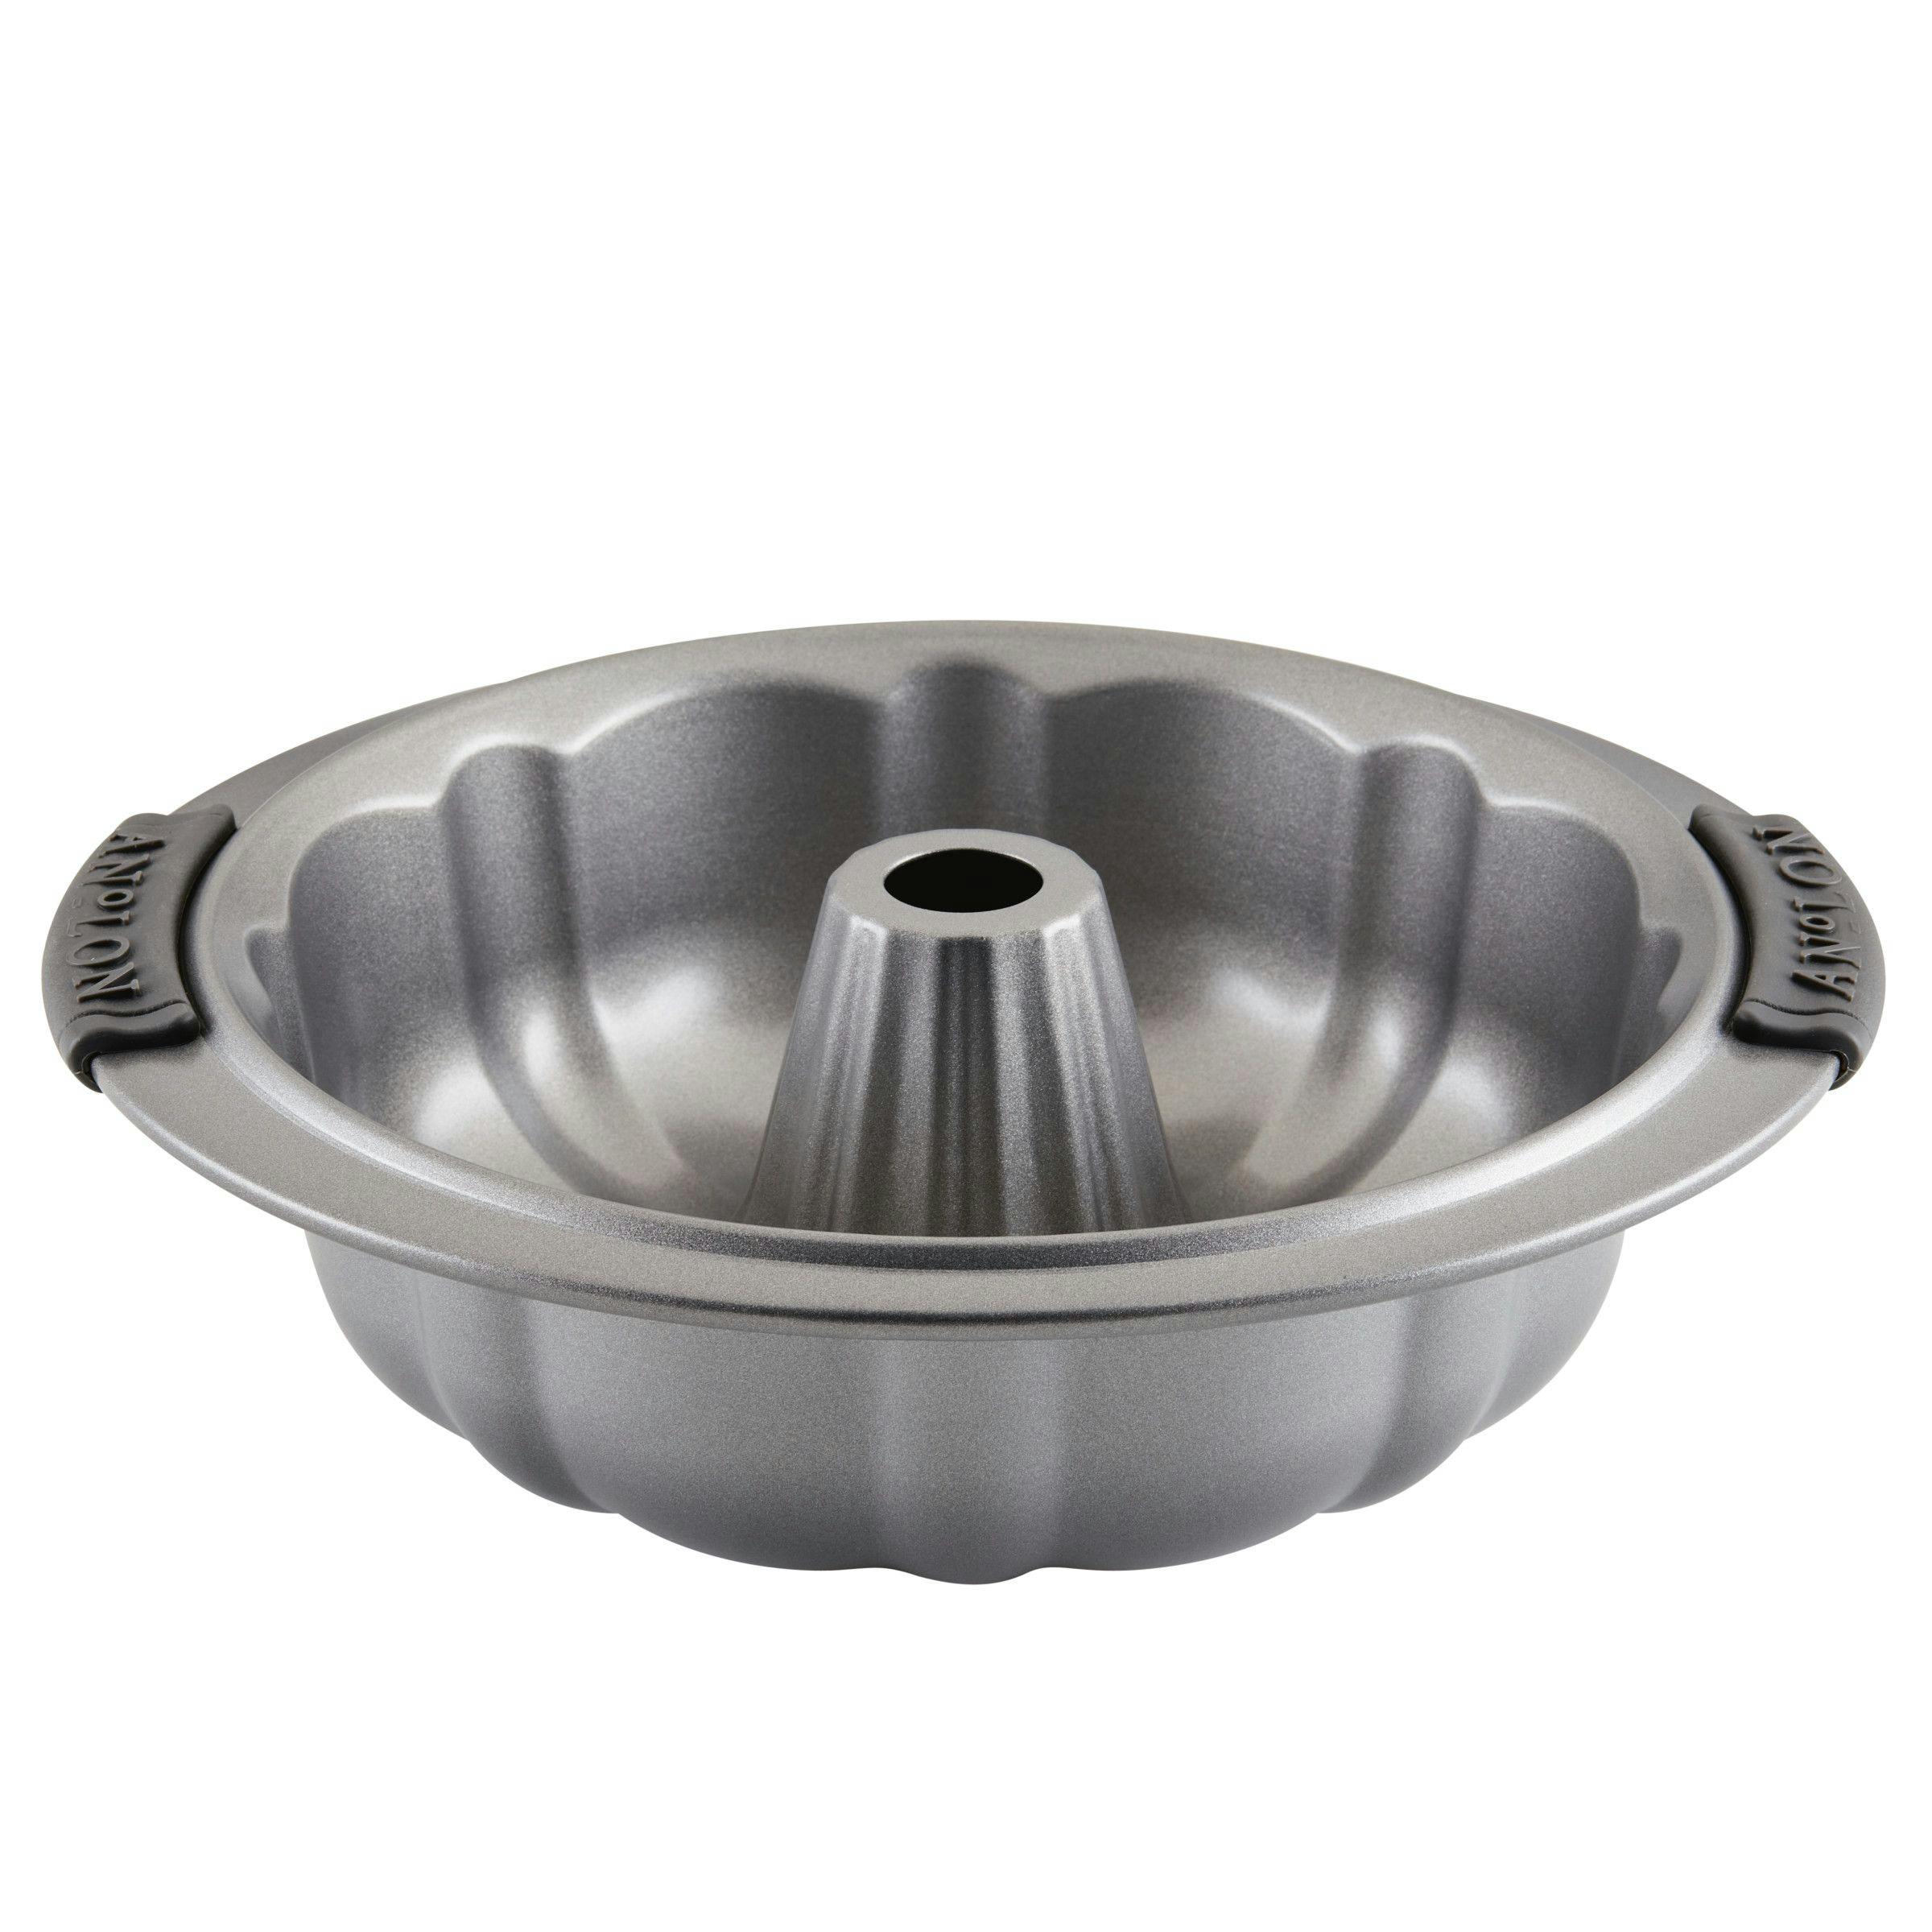 Anolon Advanced Bakeware Nonstick Fluted Mold Pan, 9.5-Inch, Gray